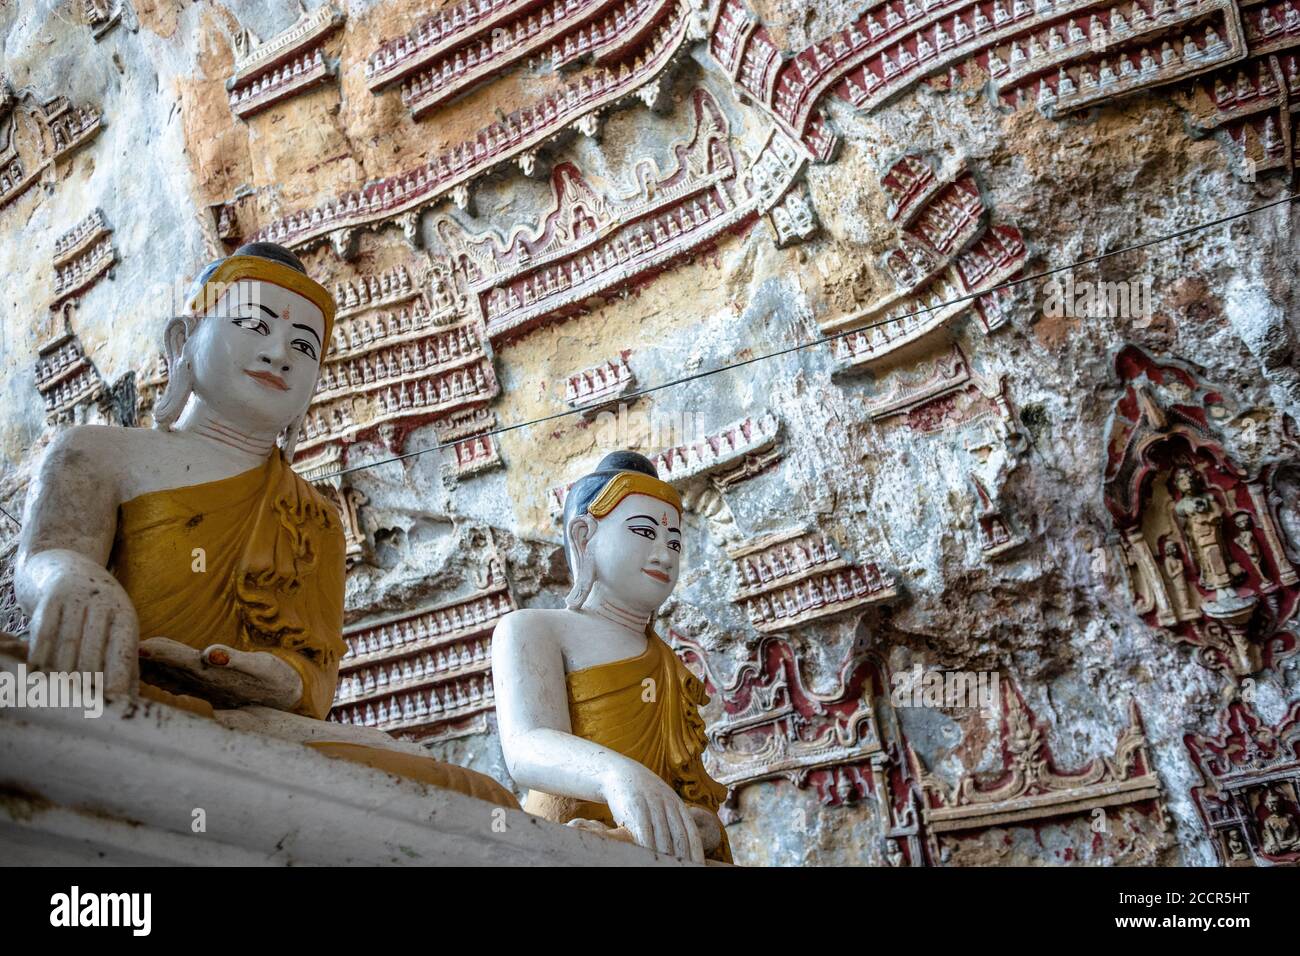 Small figurines carved on walls at Kaw Goon caves. Two bigger white and golden statues representing sitting Buddha at the foreground. Hpa An, Myanmar Stock Photo